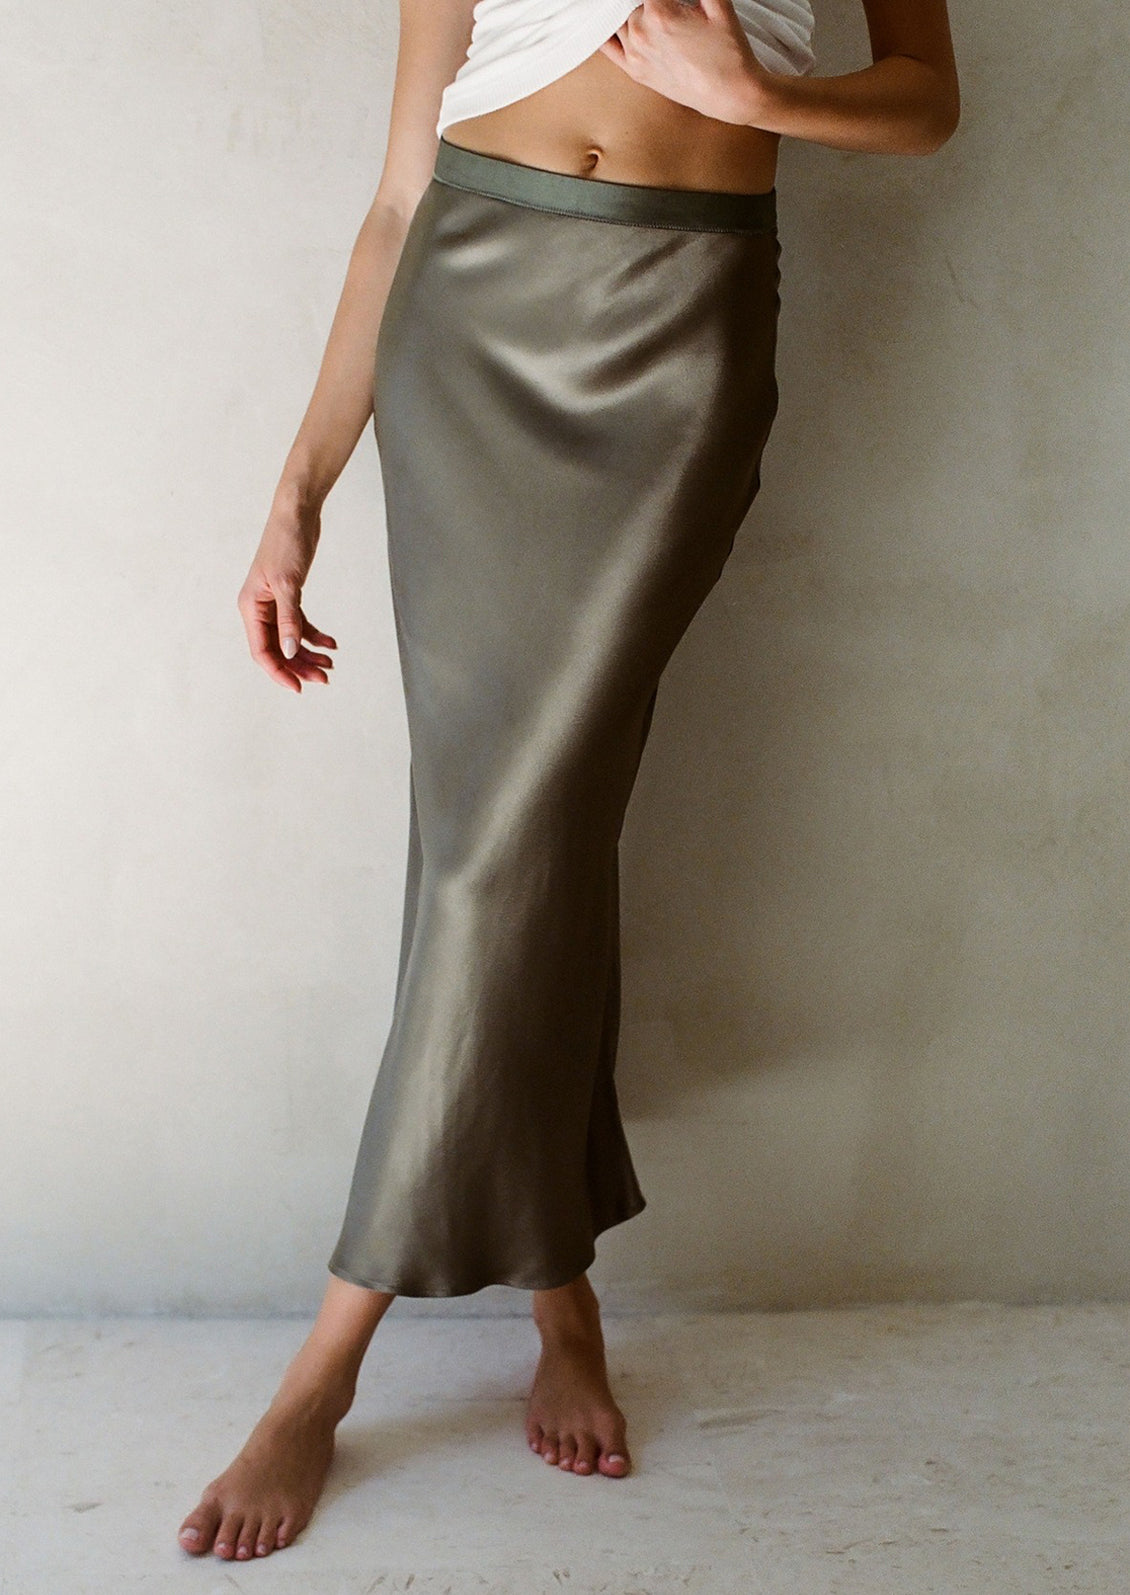 A woman wearing a form fitting skirt in olive green satin material.